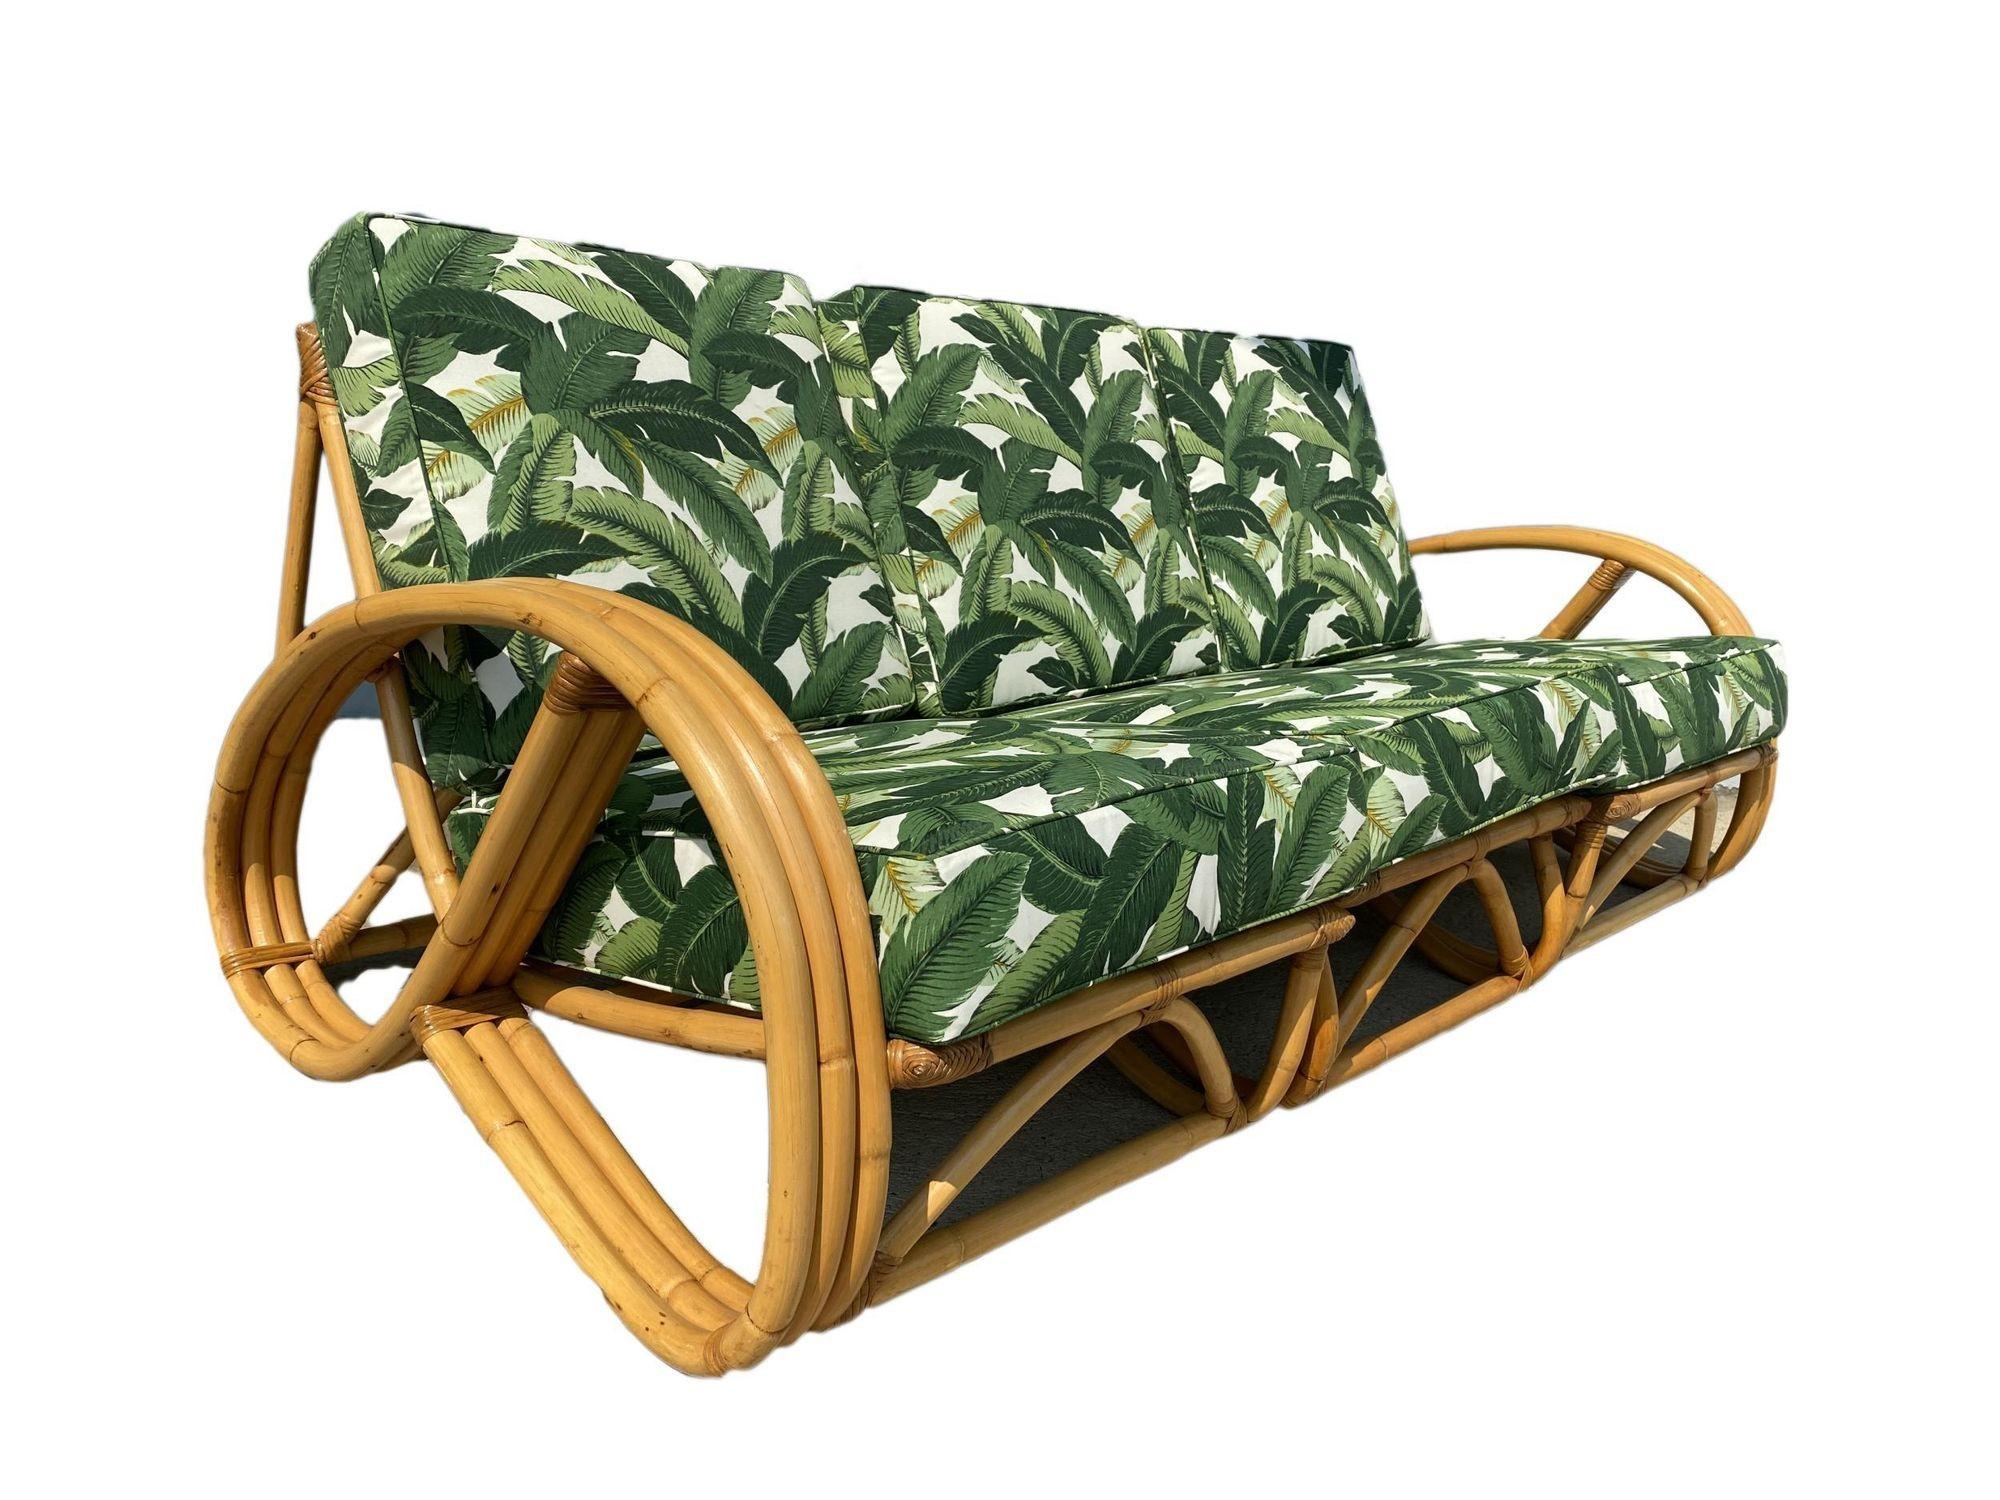 Three-strand 3/4 reverse pretzel arm rattan Livingroom set with a sectional sofa and reclining lounge chair sofa features a decorative wave detail on both sides of the base.

Measures: Sofa 28